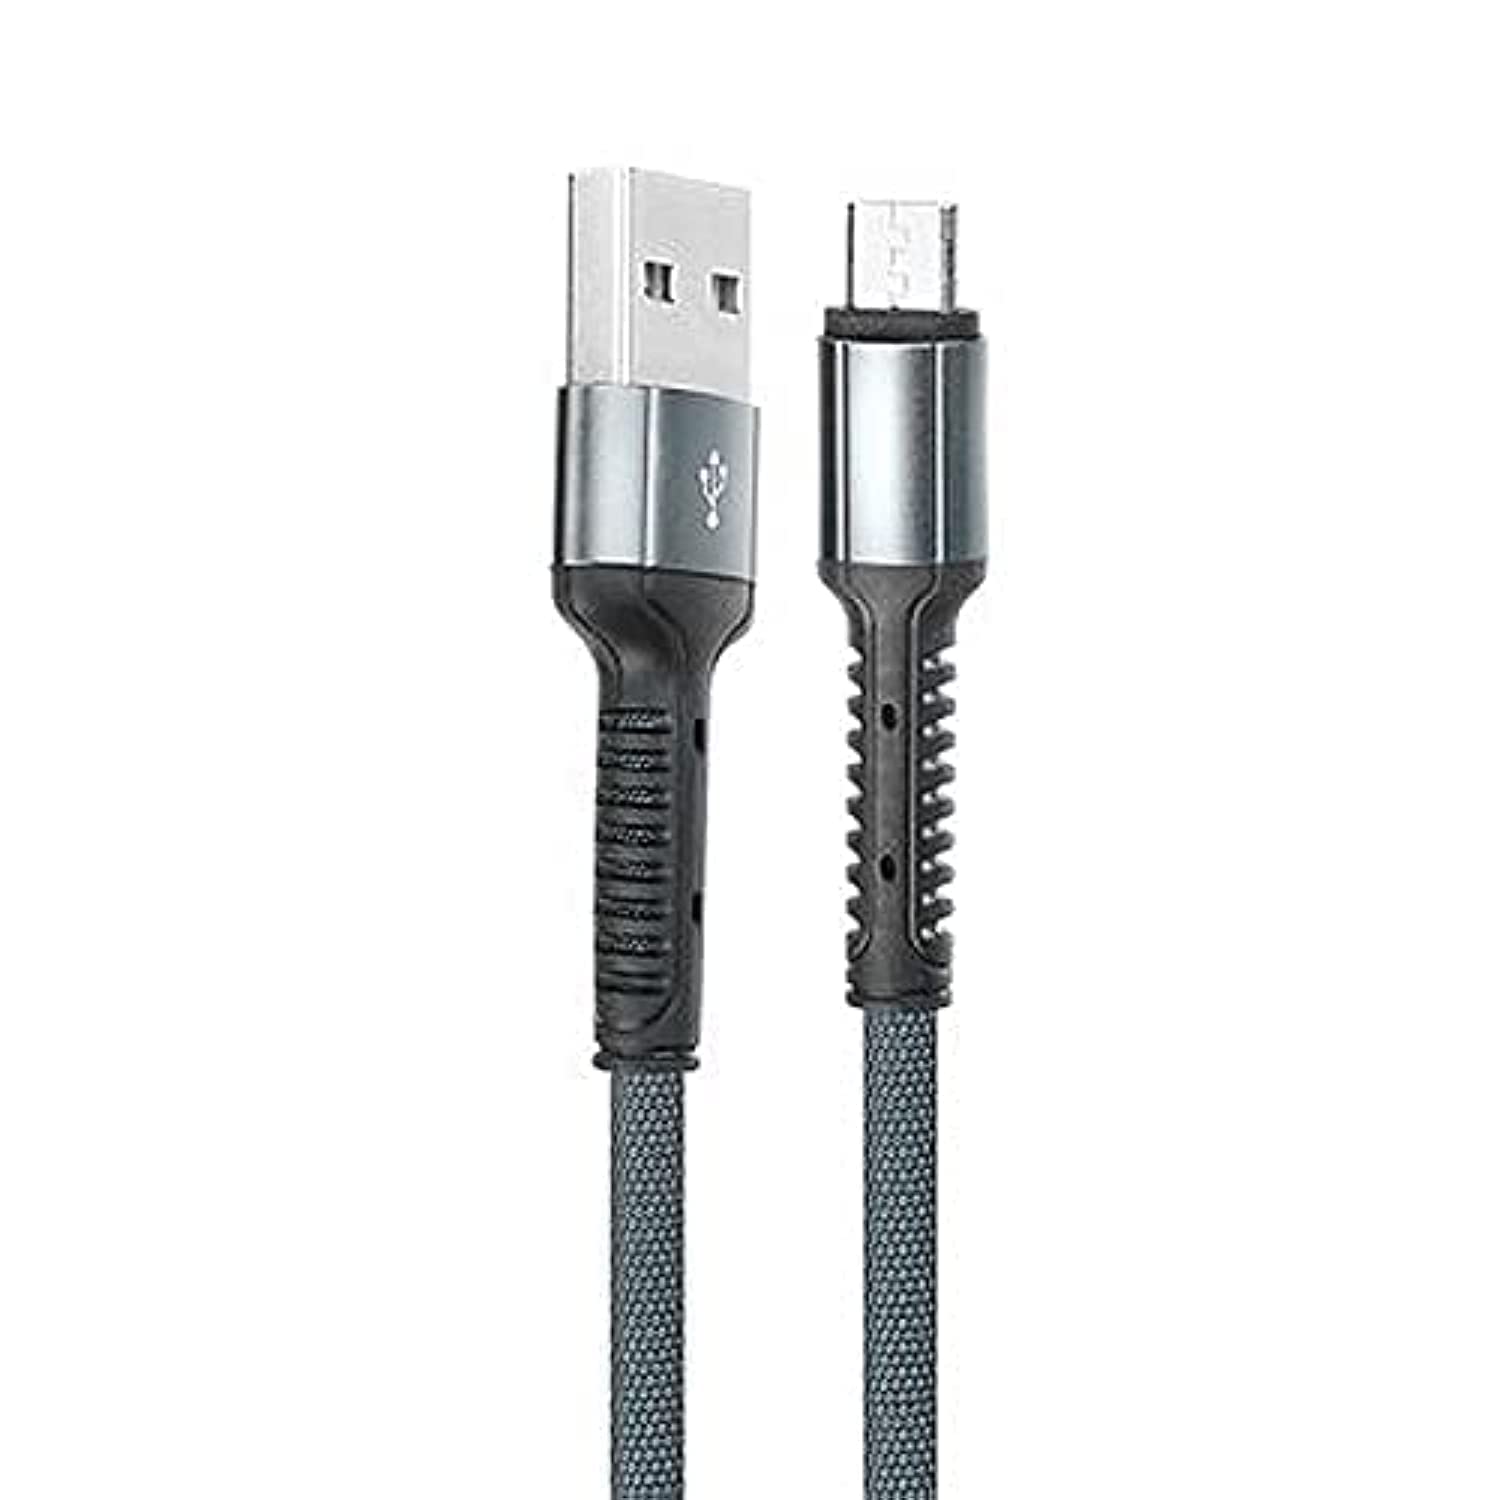 LDNIO LS63 Mobile Phone Cables 2.4A Fast Charging Micro USB Cable 1M - Grey